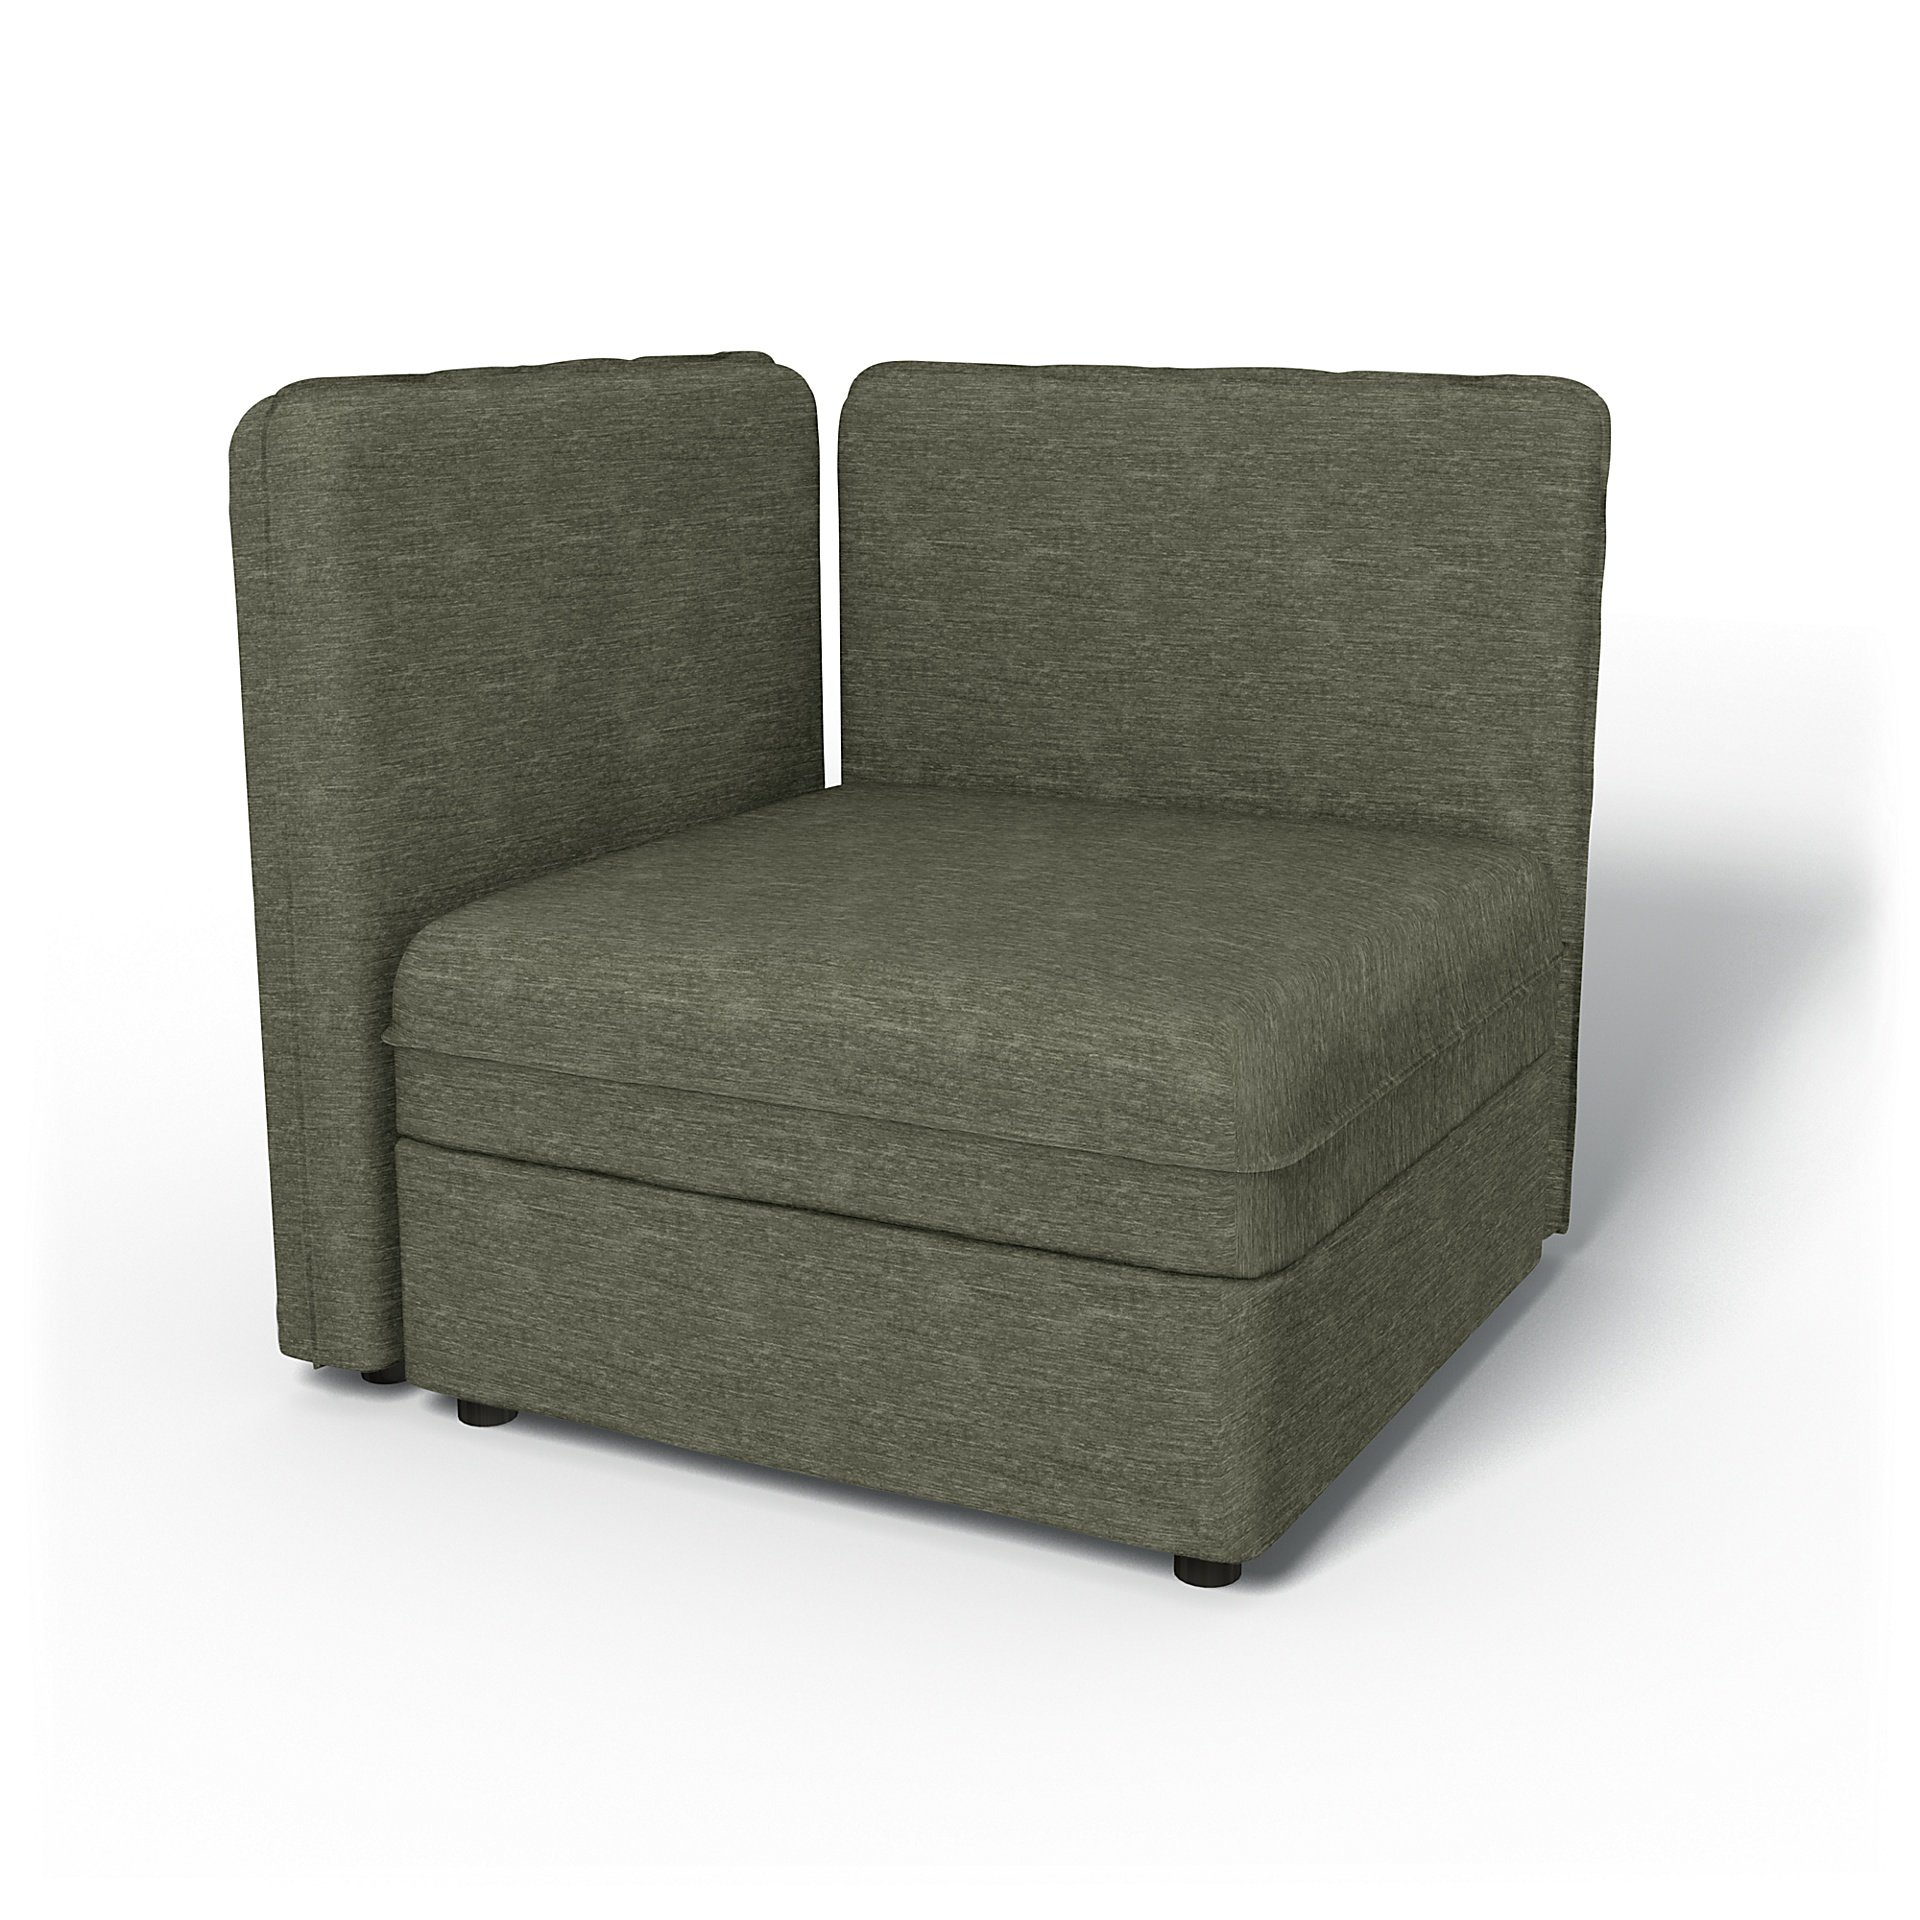 IKEA - Vallentuna Seat Module with Low Back and Storage Cover 80x80cm 32x32in, Green Grey, Velvet - 